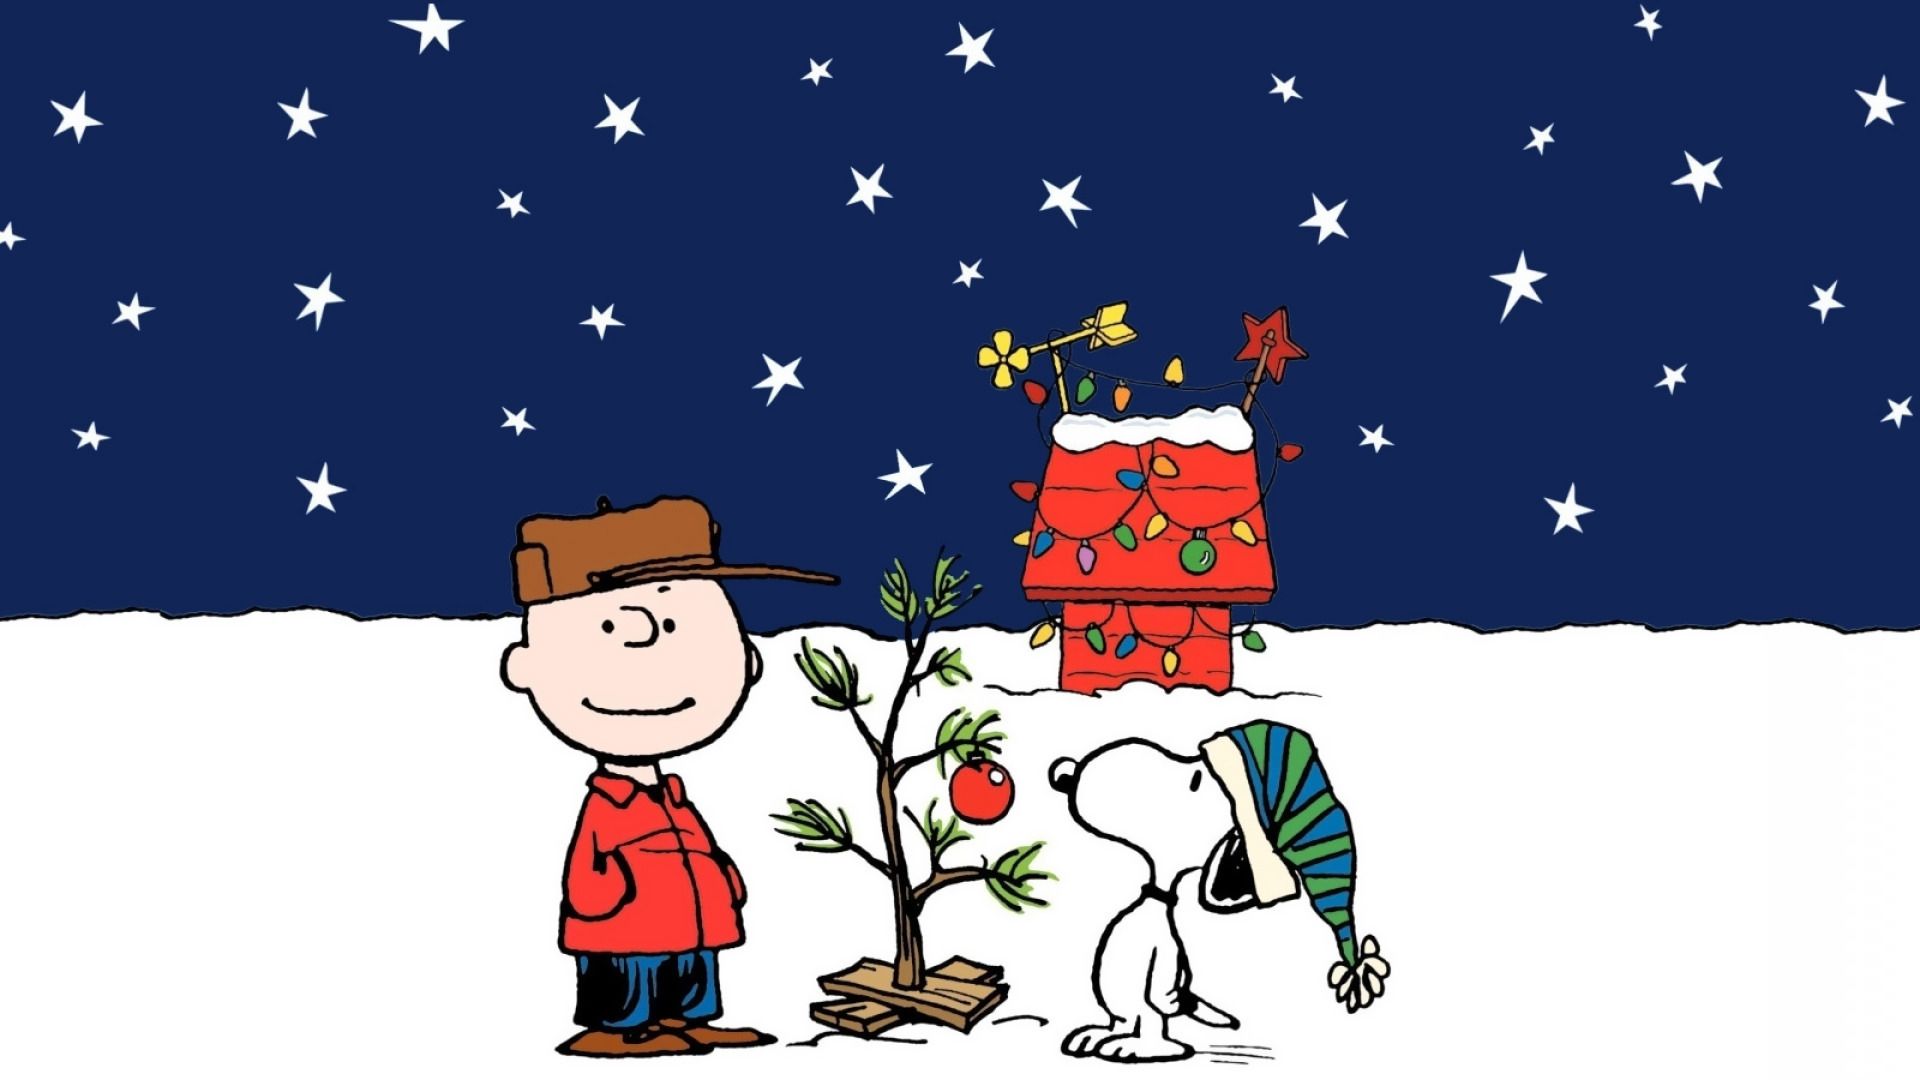 A Charlie Brown Christmas background